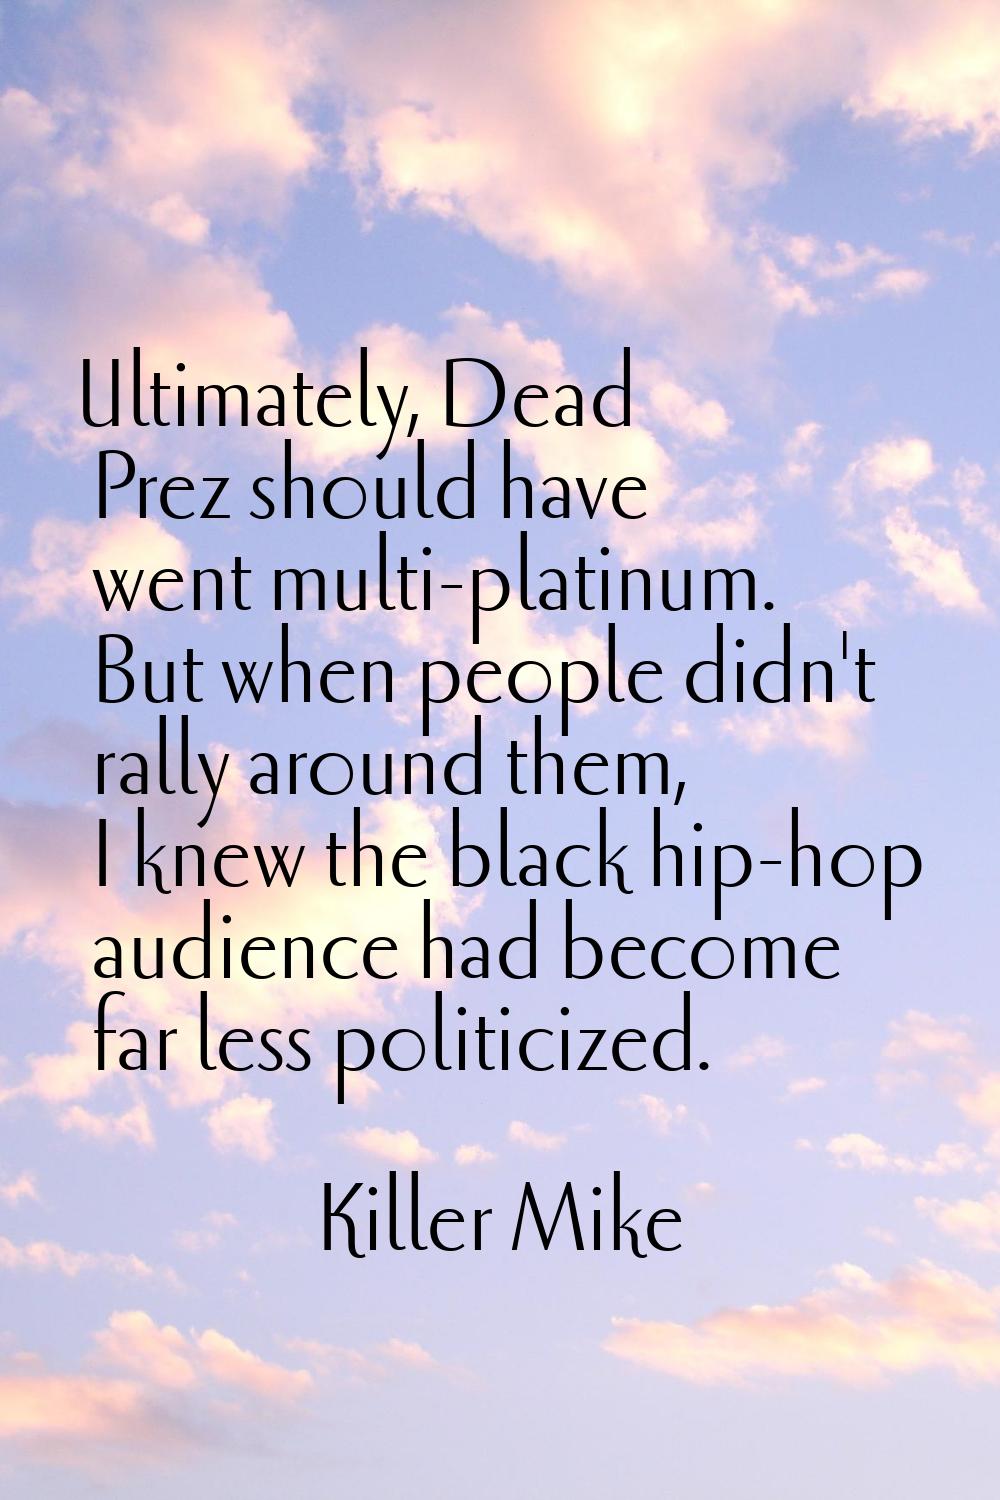 Ultimately, Dead Prez should have went multi-platinum. But when people didn't rally around them, I 